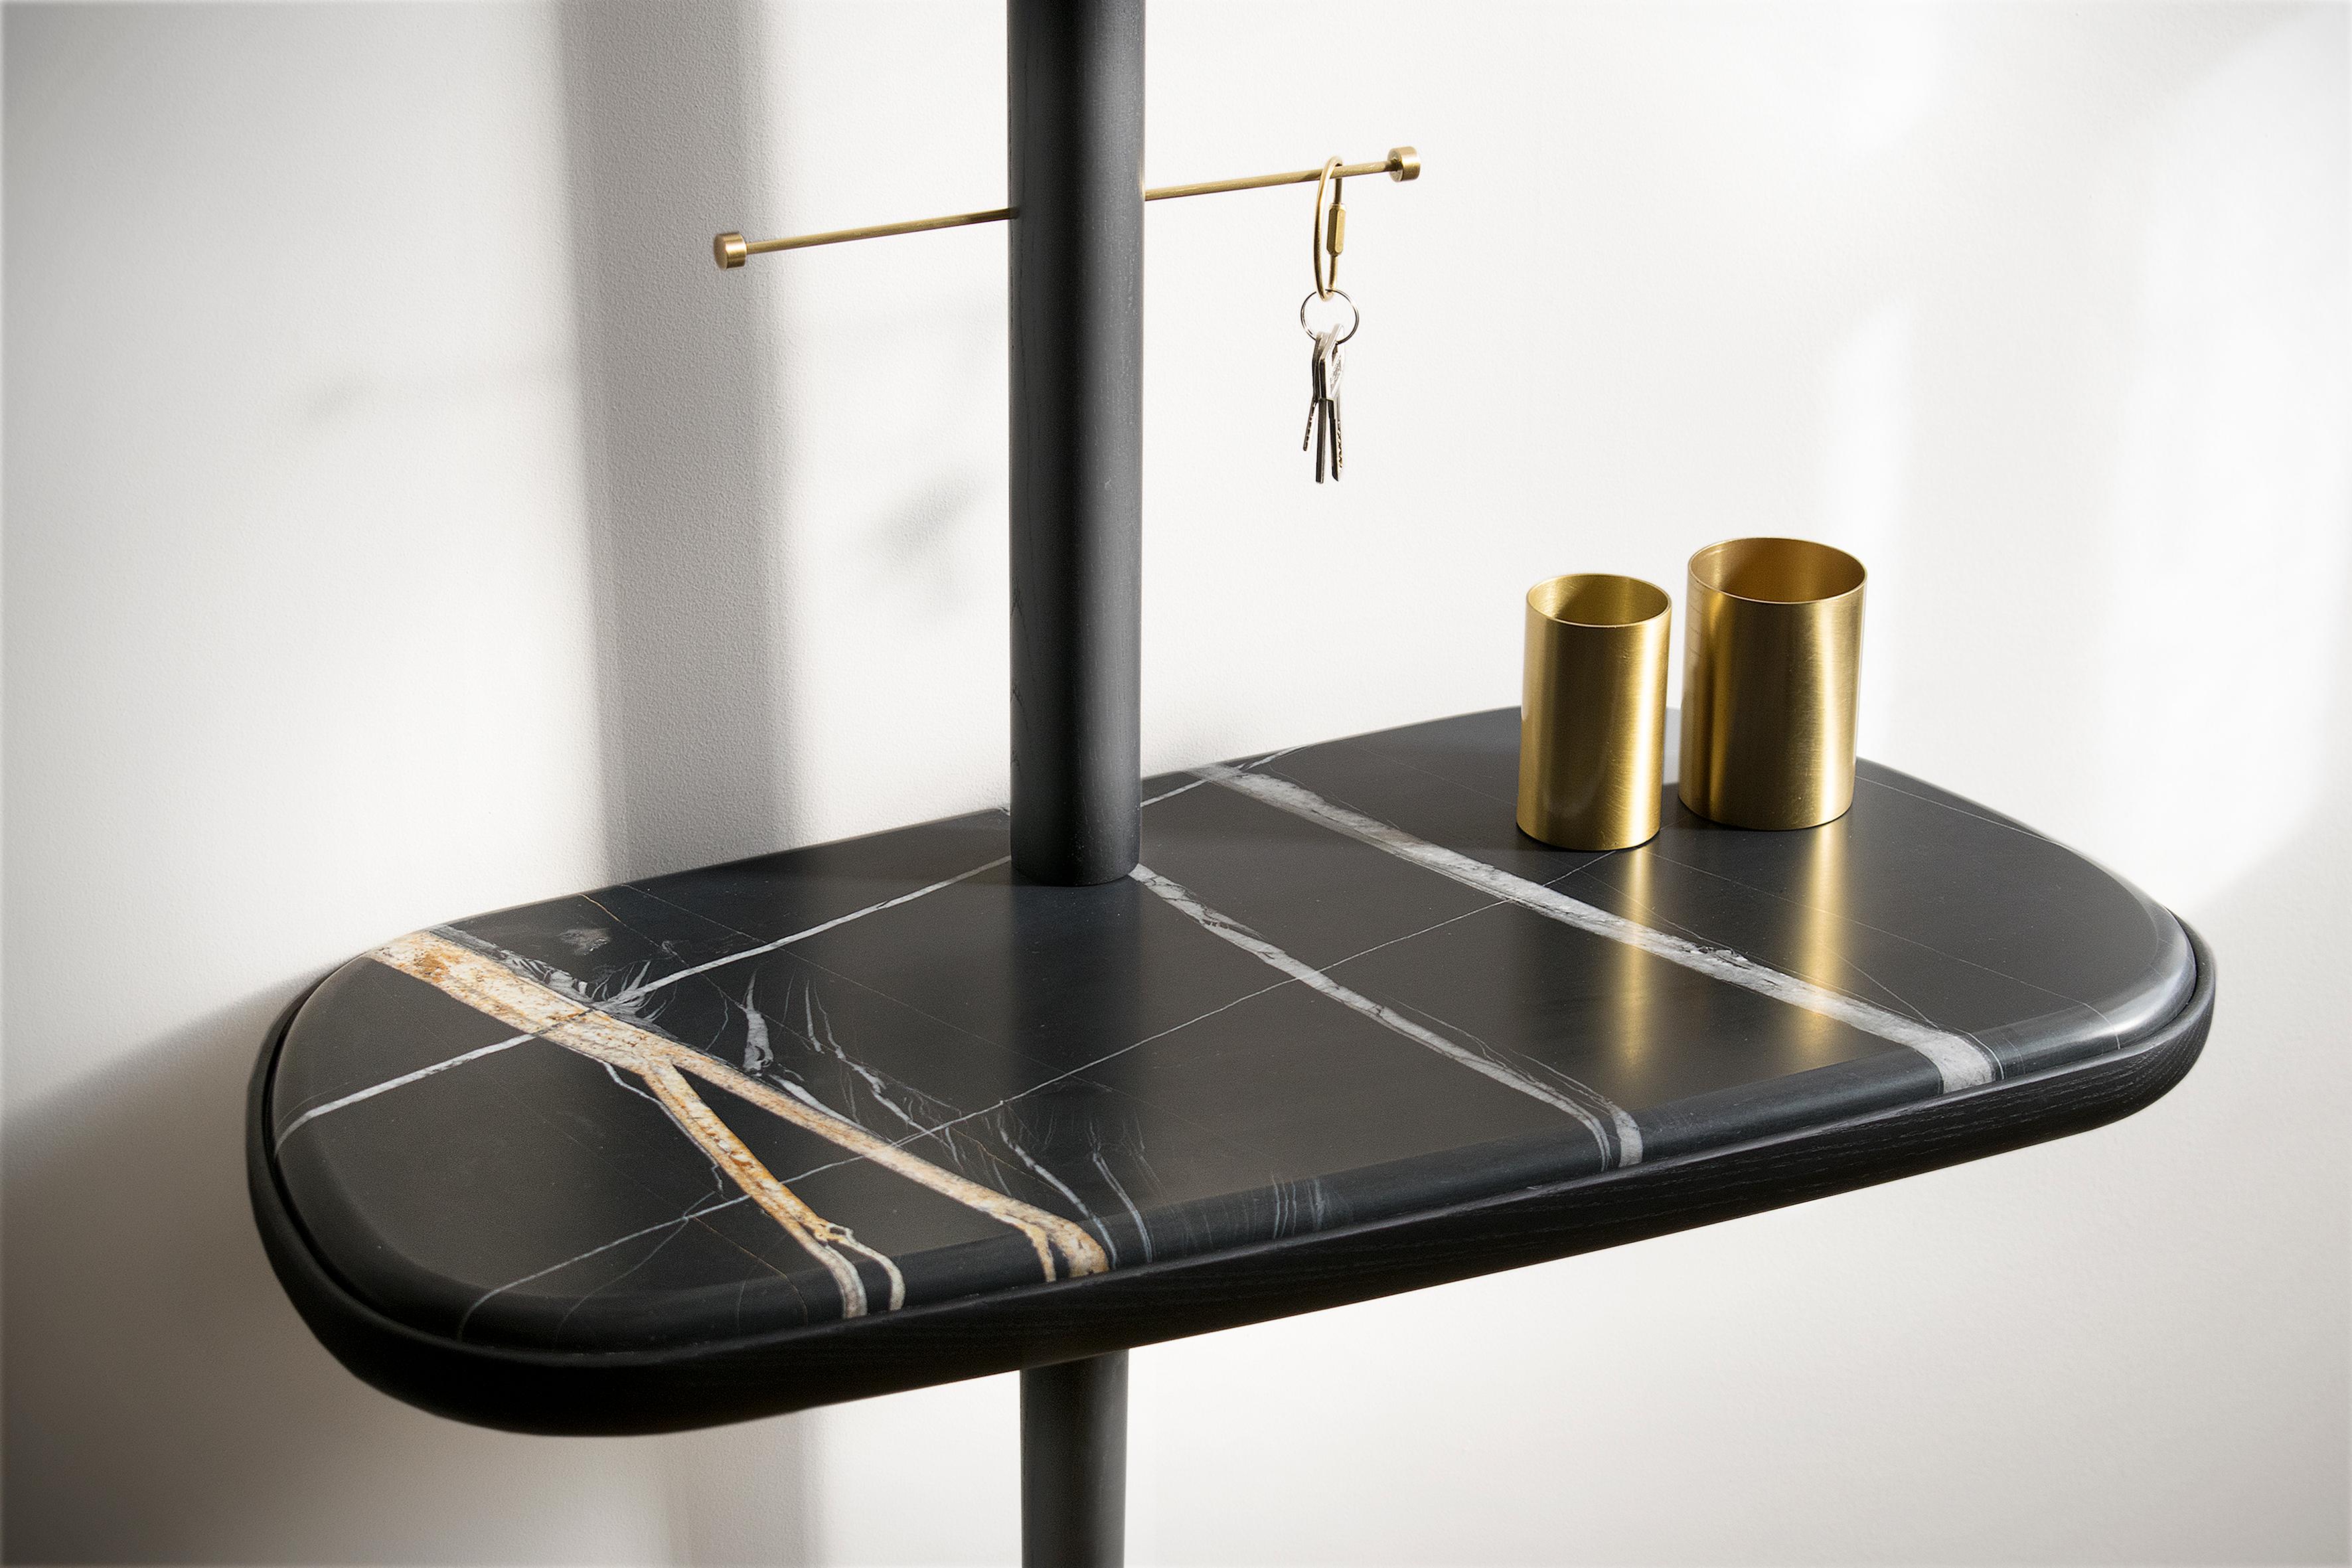 Timeless piece due to its minimalist and warm design. The original gold rod sophis- ticates the traditionality of the piece.

Available in Walnut, Emperador Marble, Black Ash,  Sahara Noir